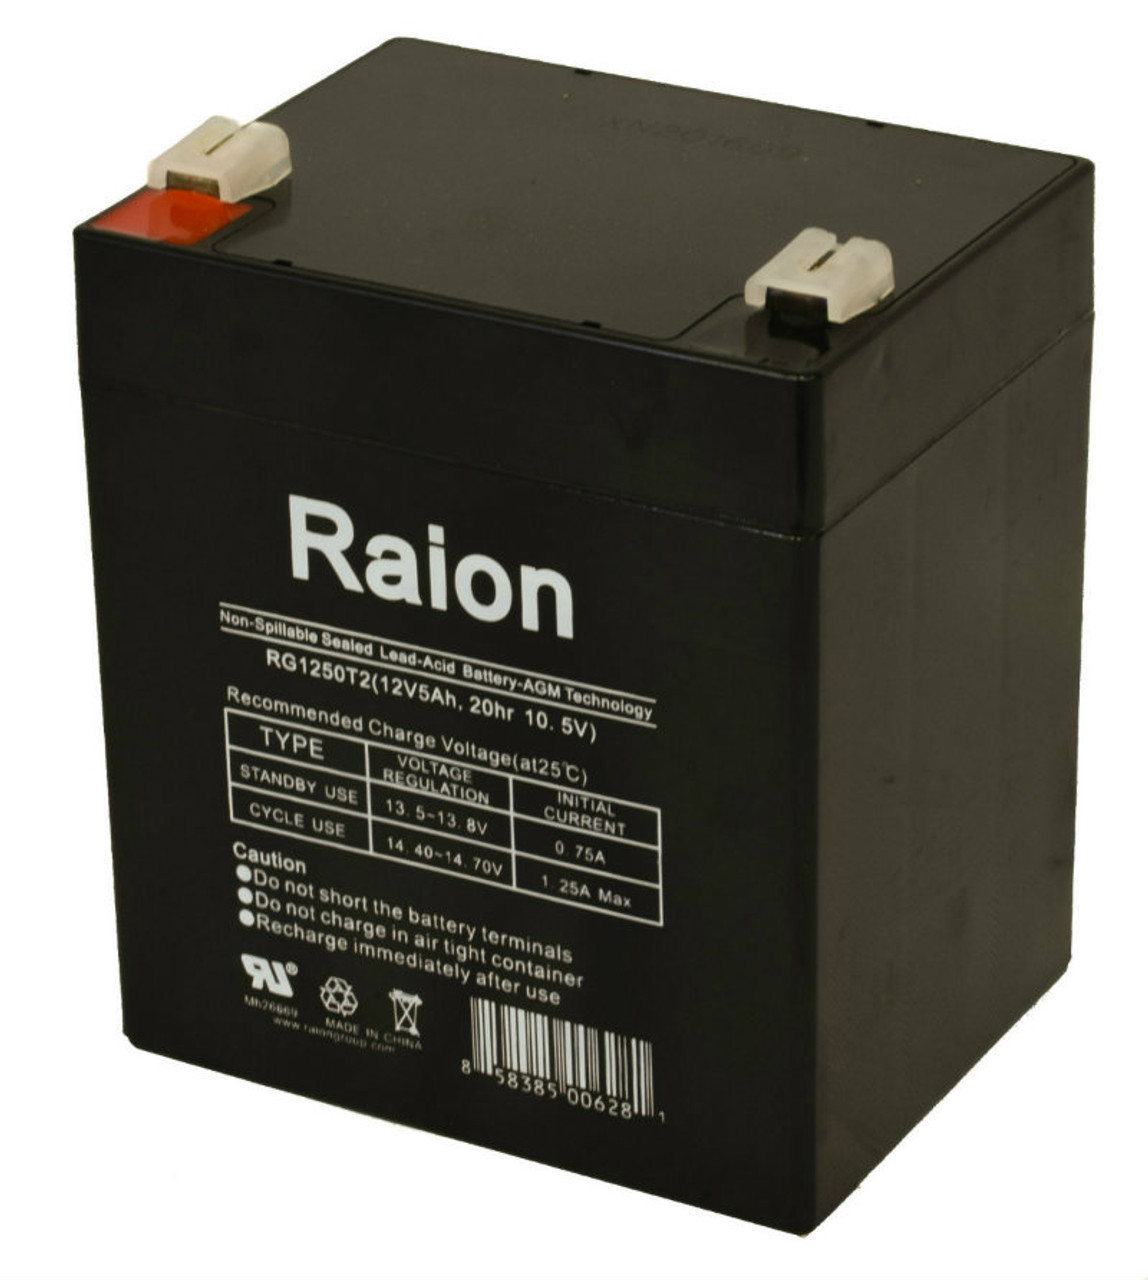 Raion Power RG1250T1 Replacement Alarm Security System Battery for Napco Alarms MA1000E4LB PAK